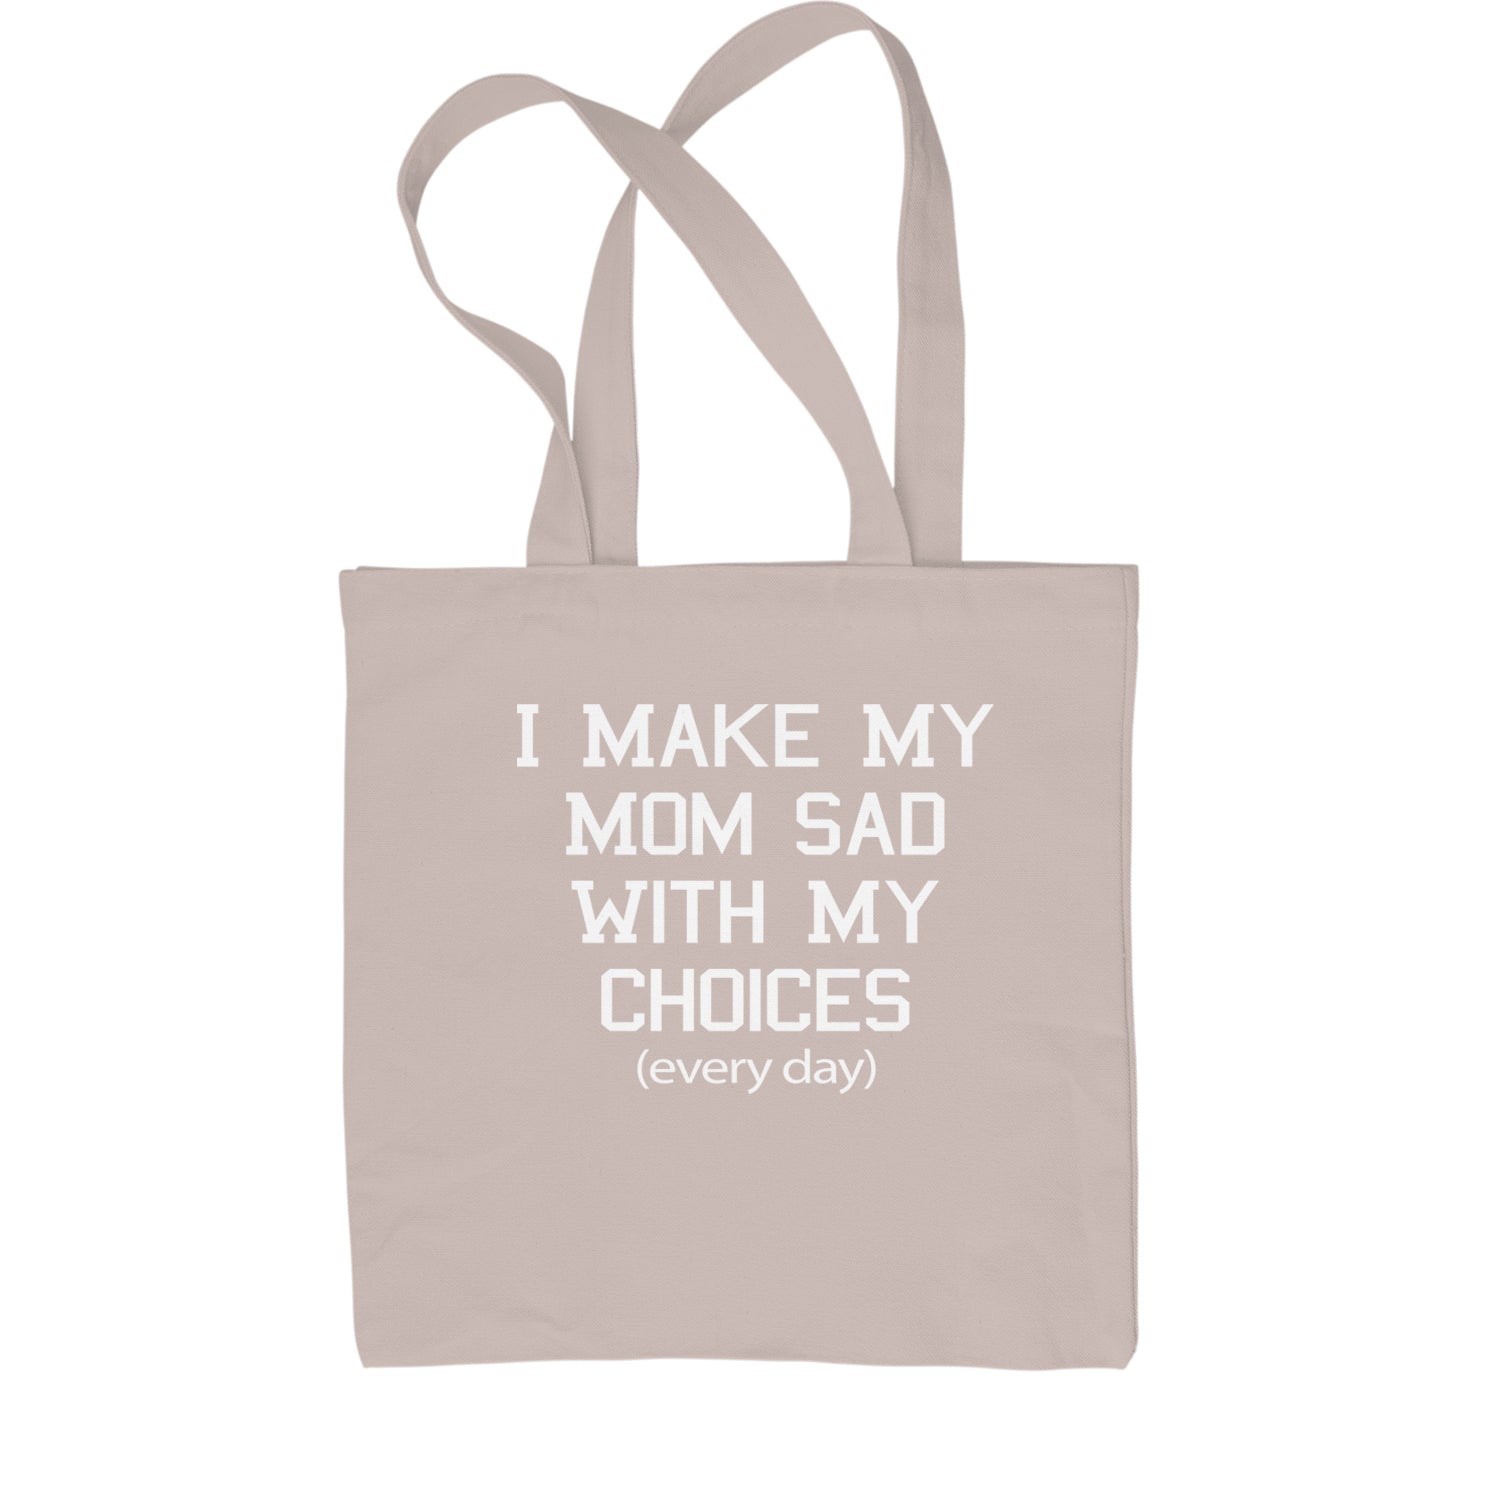 I Make My Mom Sad With My Choices Every Day Shopping Tote Bag funny, ironic, meme by Expression Tees